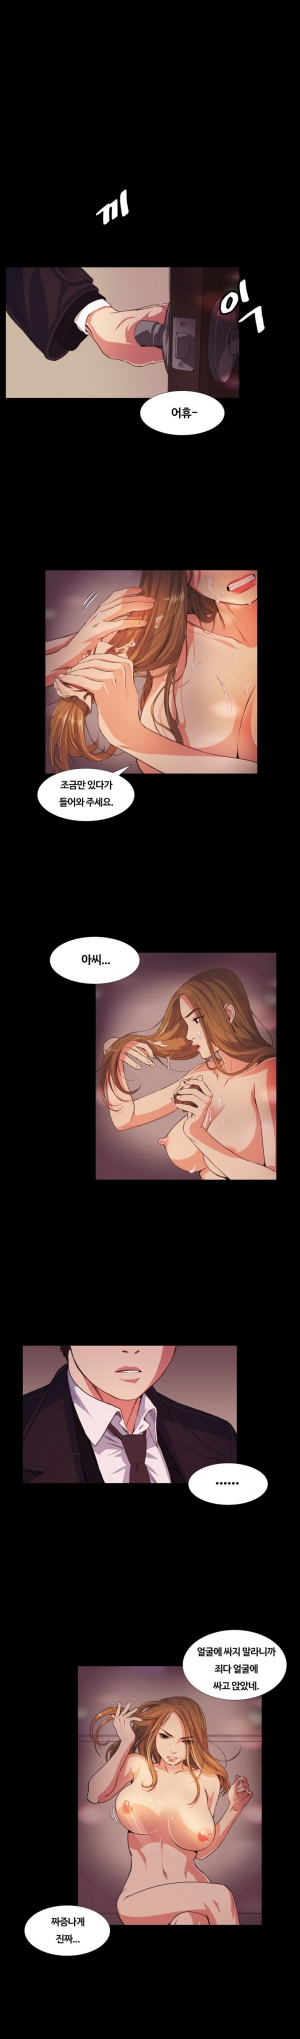  By Chance (Ep. 1-30)  [English] - Page 276